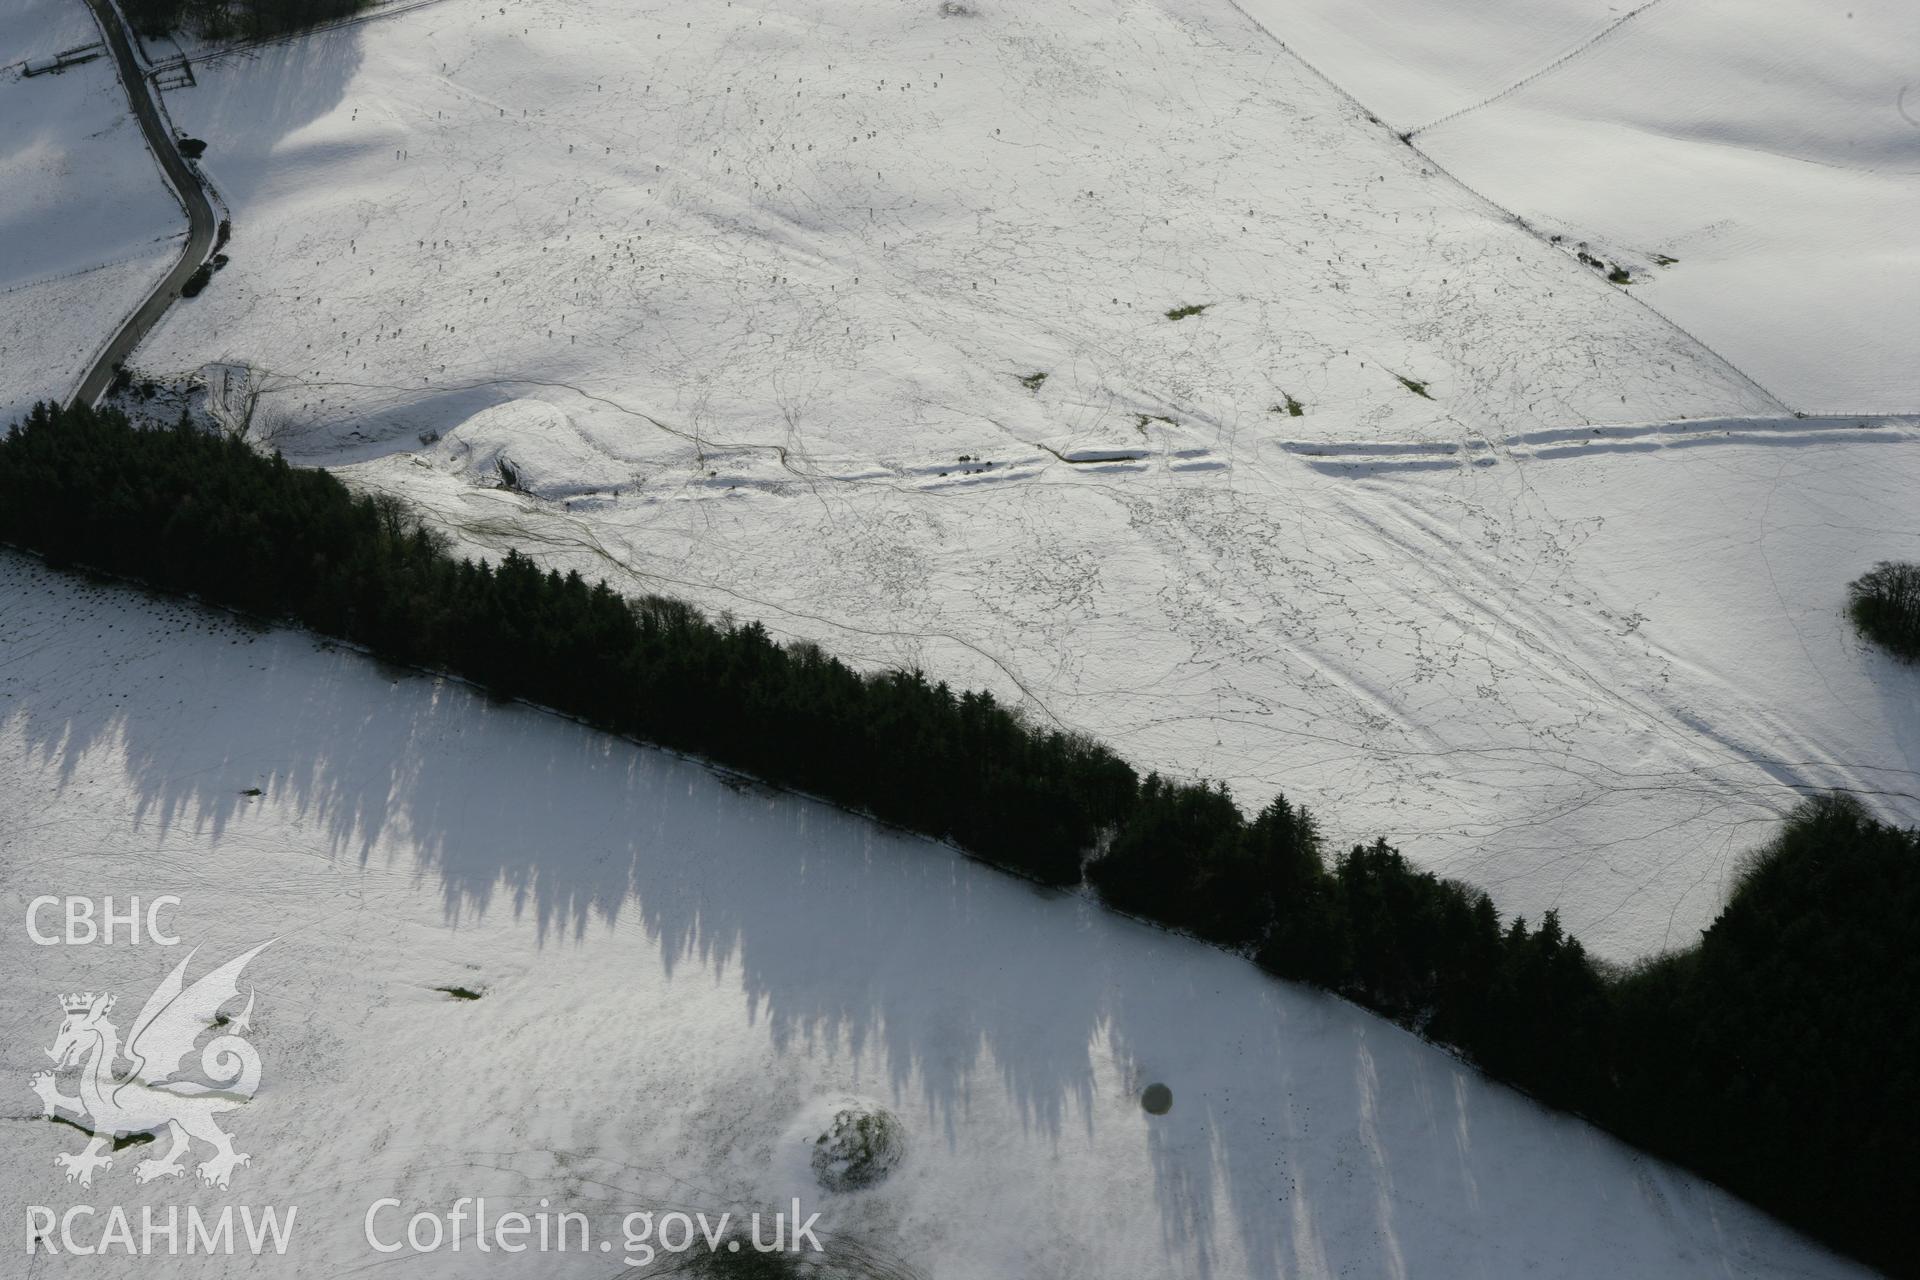 RCAHMW colour oblique photograph of Crugyn Bank, under snow, with round barrows. Taken by Toby Driver on 18/12/2011.